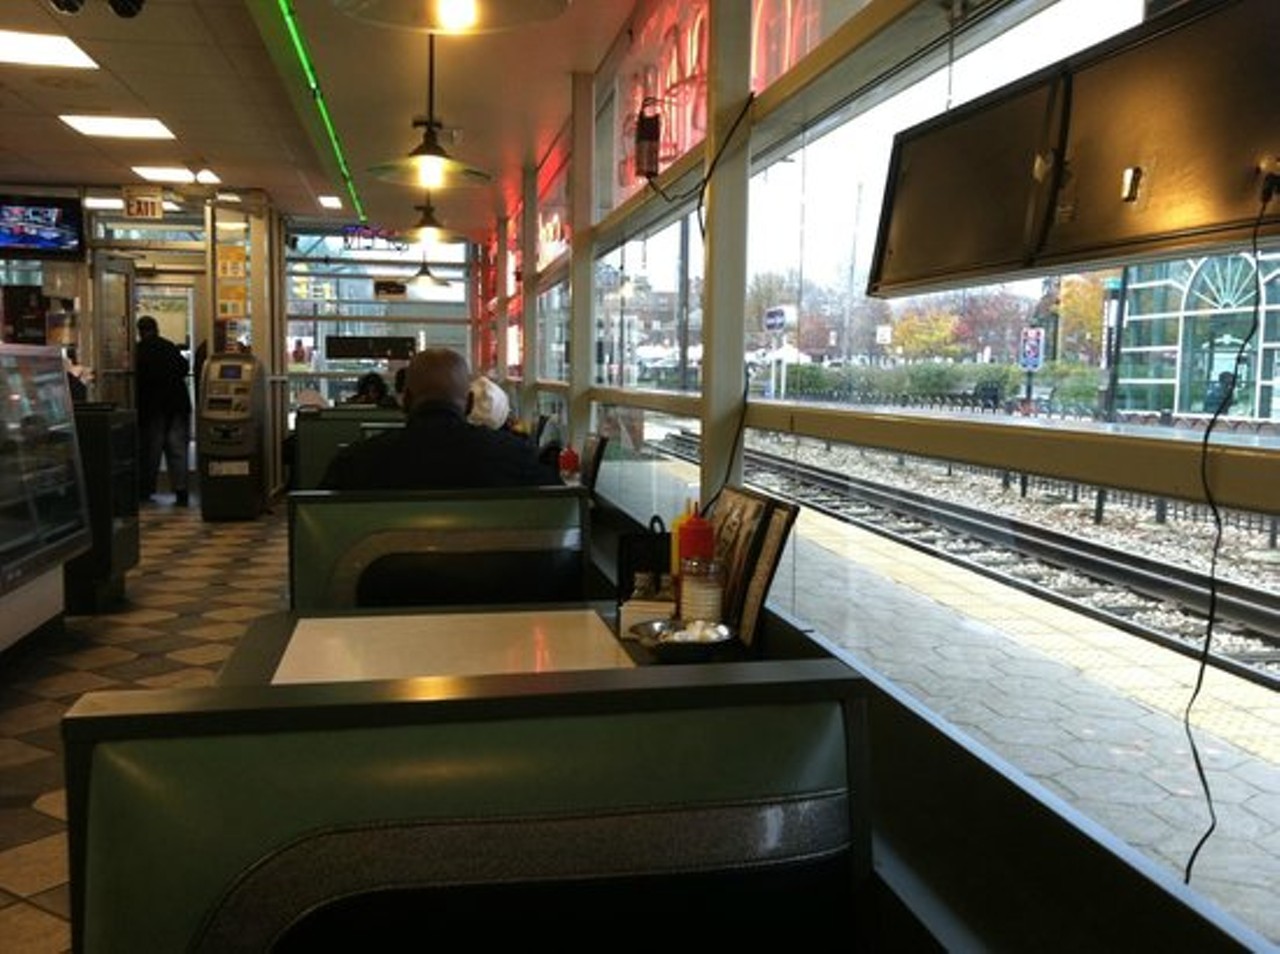  Michael&#146;s Diner
13051 Shaker Blvd., Shaker Square
Head to Shaker Square for the quintessential old-school diner, complete with small booths, neon lights and a checkered floor. There&#146;s been a diner in this spot, located basically on the Rapid tracks, since the 1950&#146;s and Michael&#146;s has operated since 1996.
Photo via Scene Archives